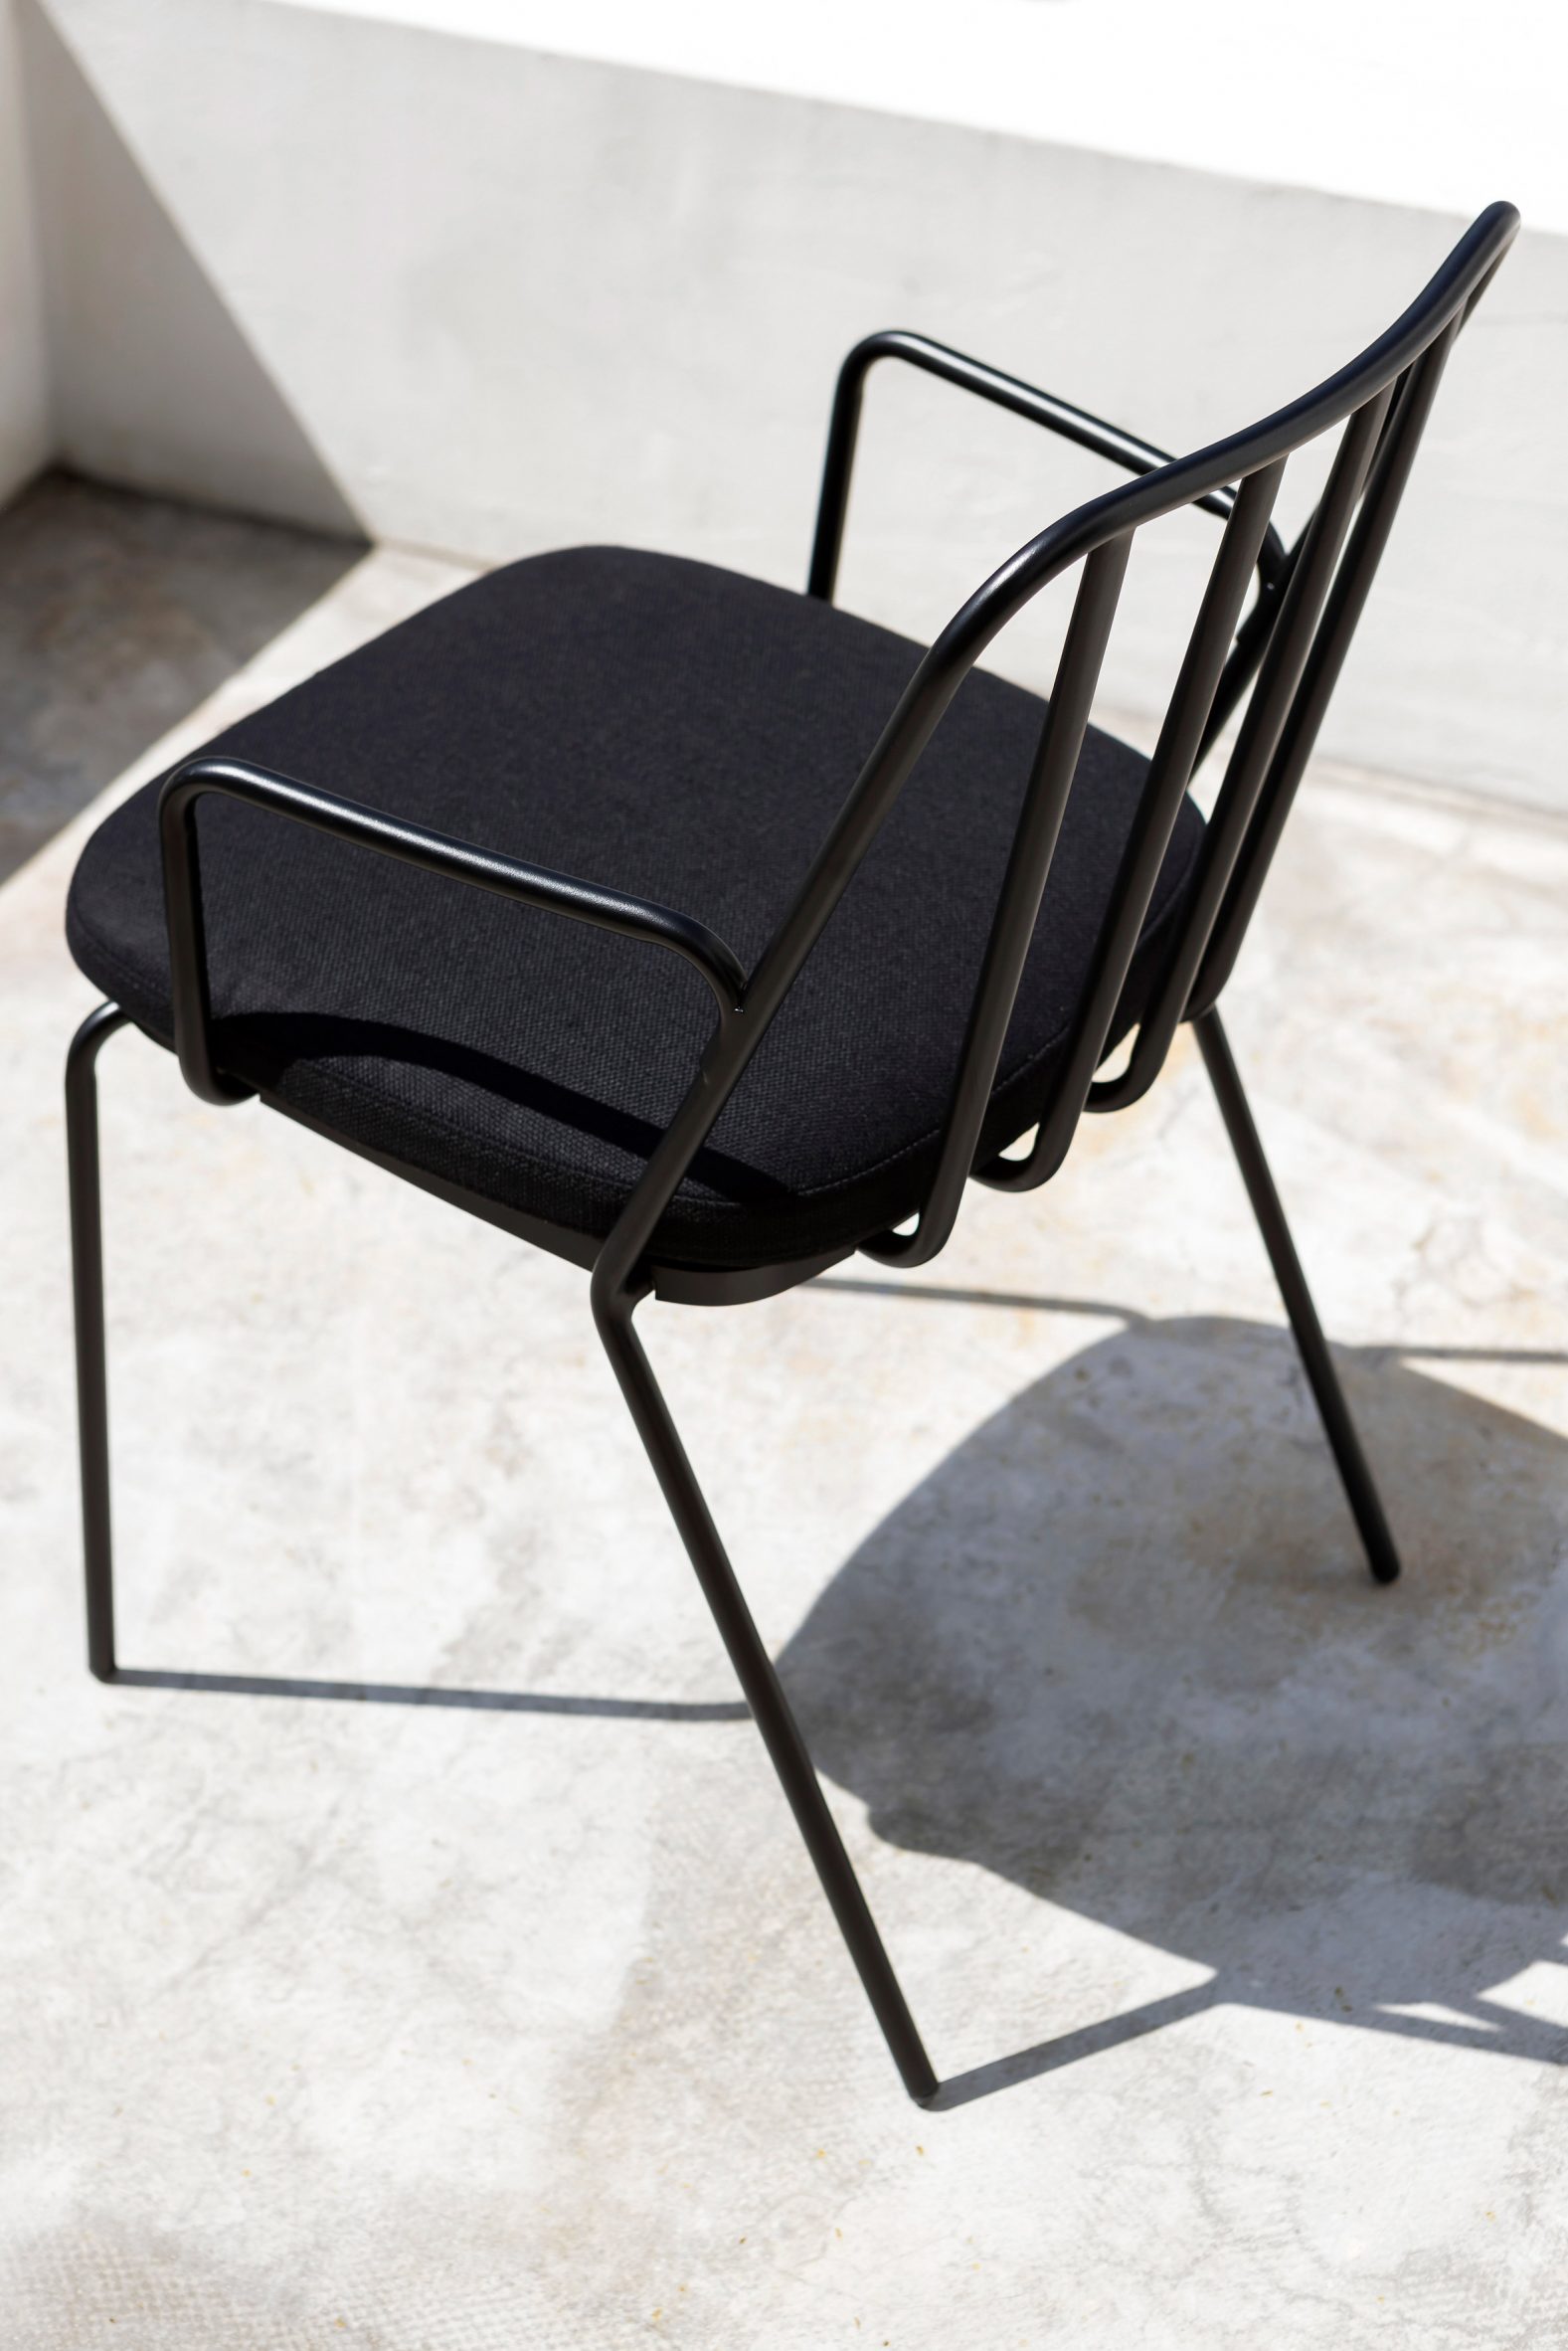 Palm A chair by Jean-Michel Wilmotte for Parla Design